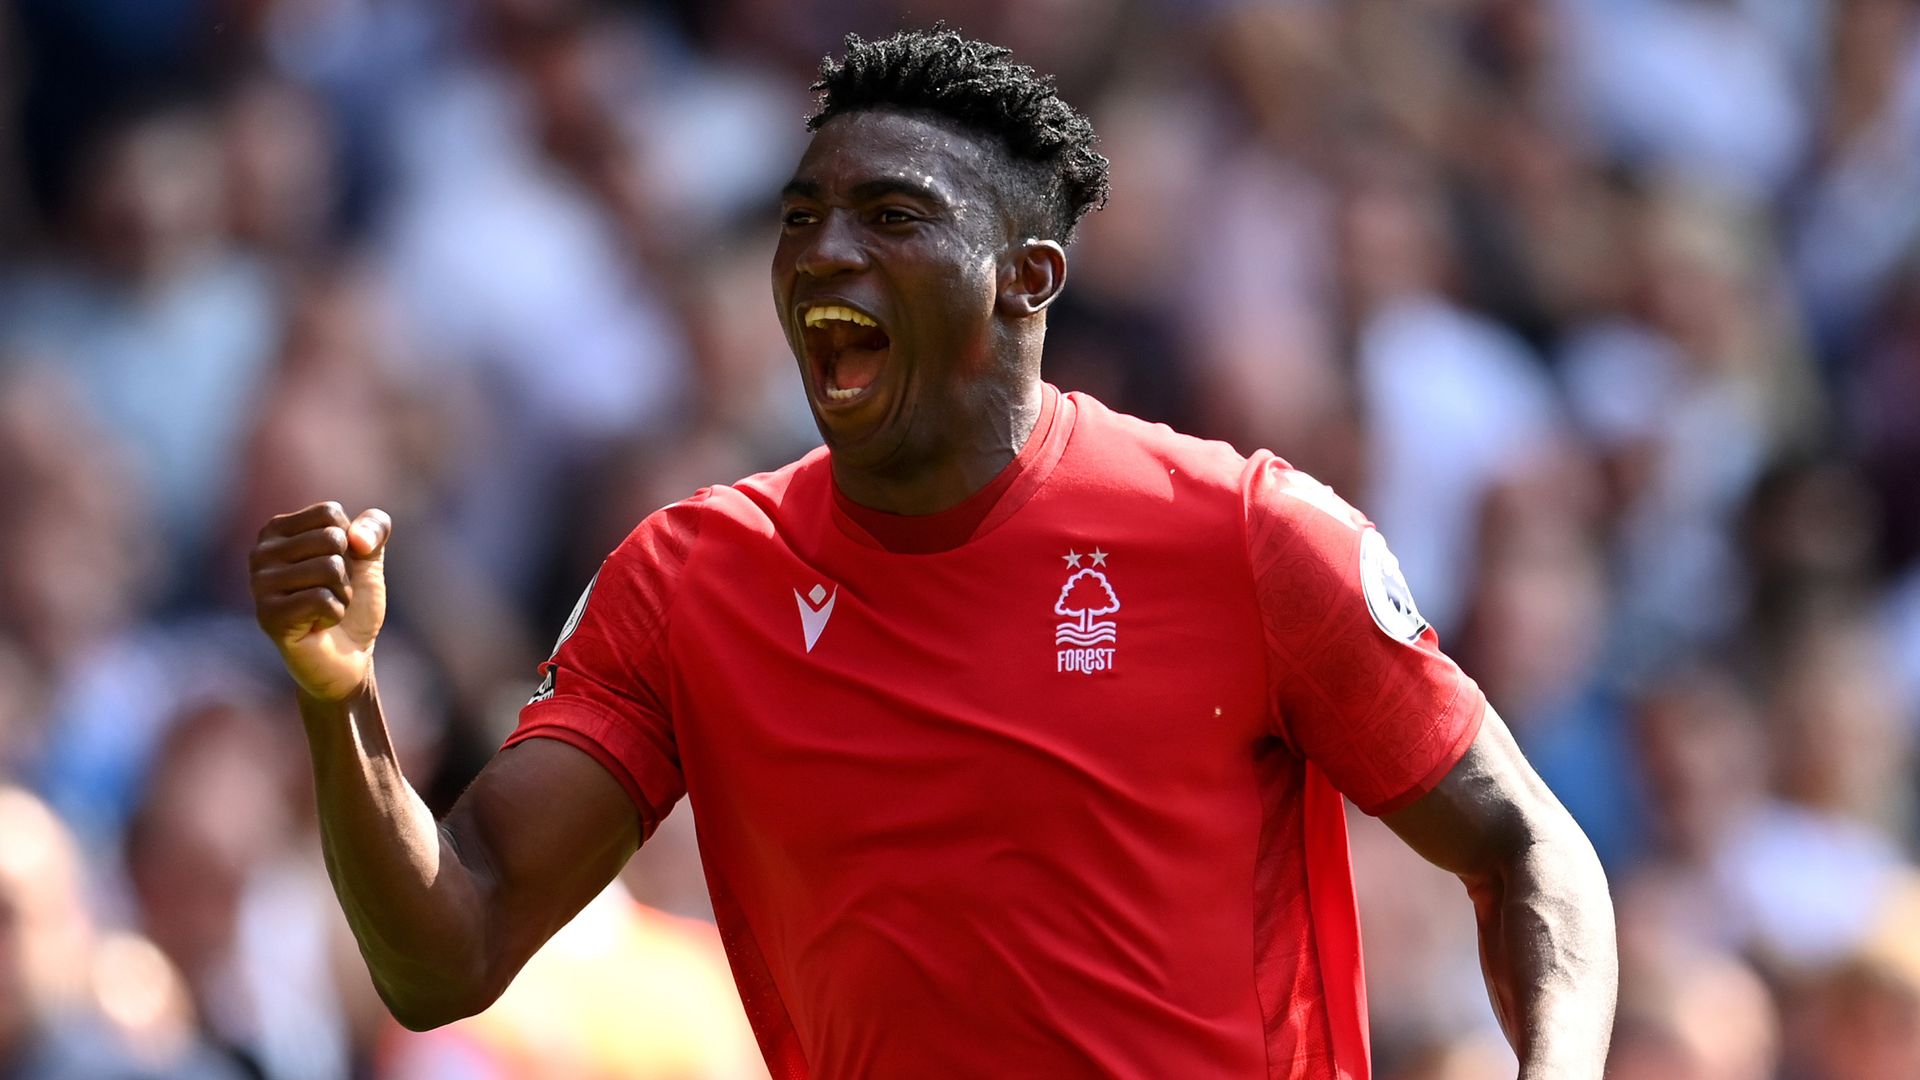 Nottingham Forest 1-0 West Ham: Taiwo Awoniyi goal earns victory as Declan Rice sees penalty saved